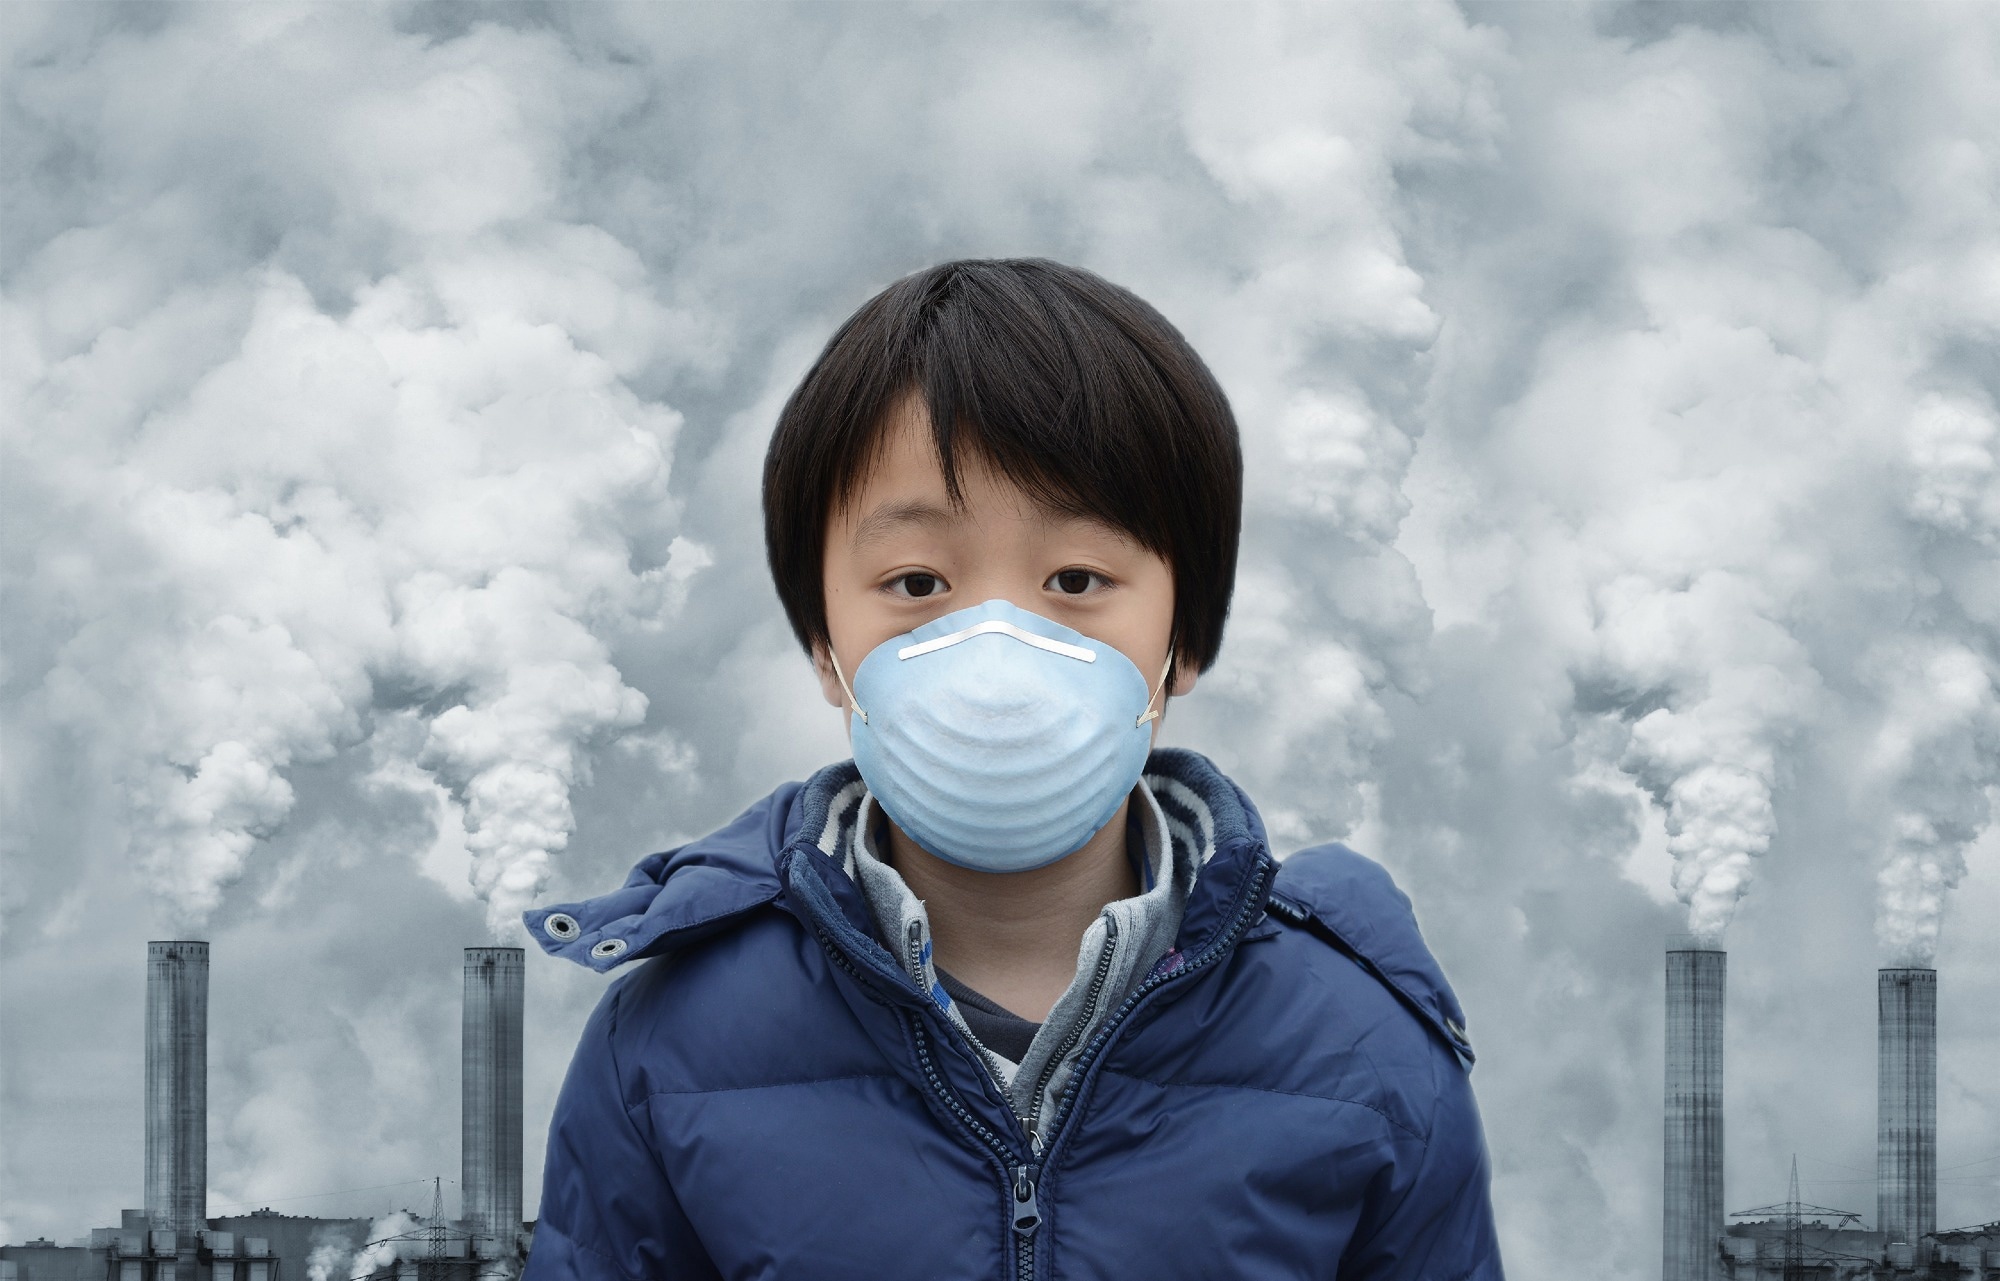 Study: Neuroinflammation and Neurodegeneration of the Central Nervous System from Air Pollutants: A Scoping Review. Image Credit: Hung Chung Chih / Shutterstock